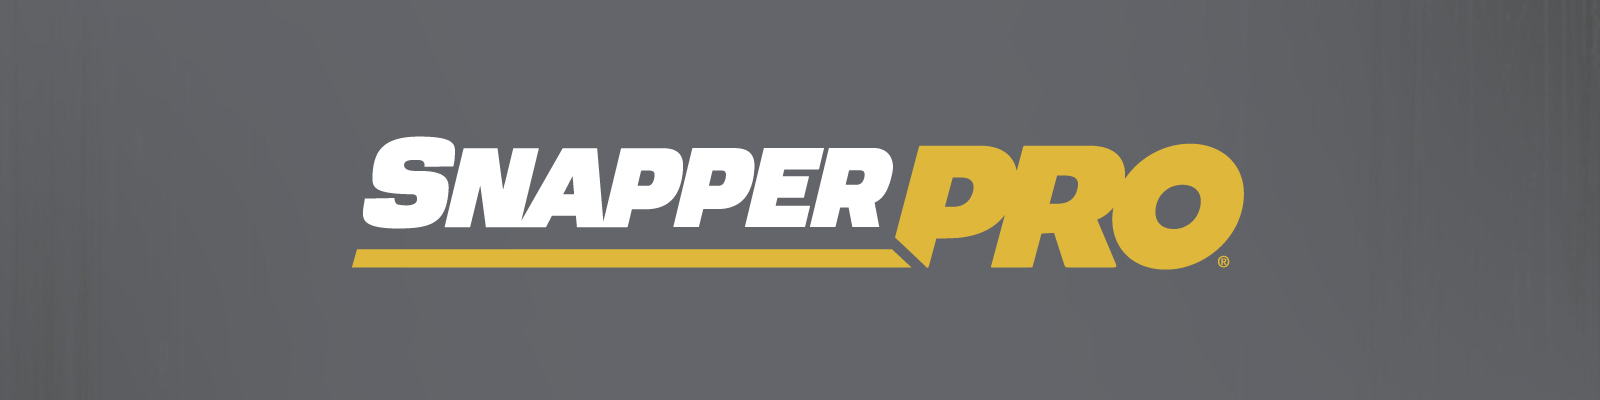 Snapper Pro Marketing and Advertising Materials